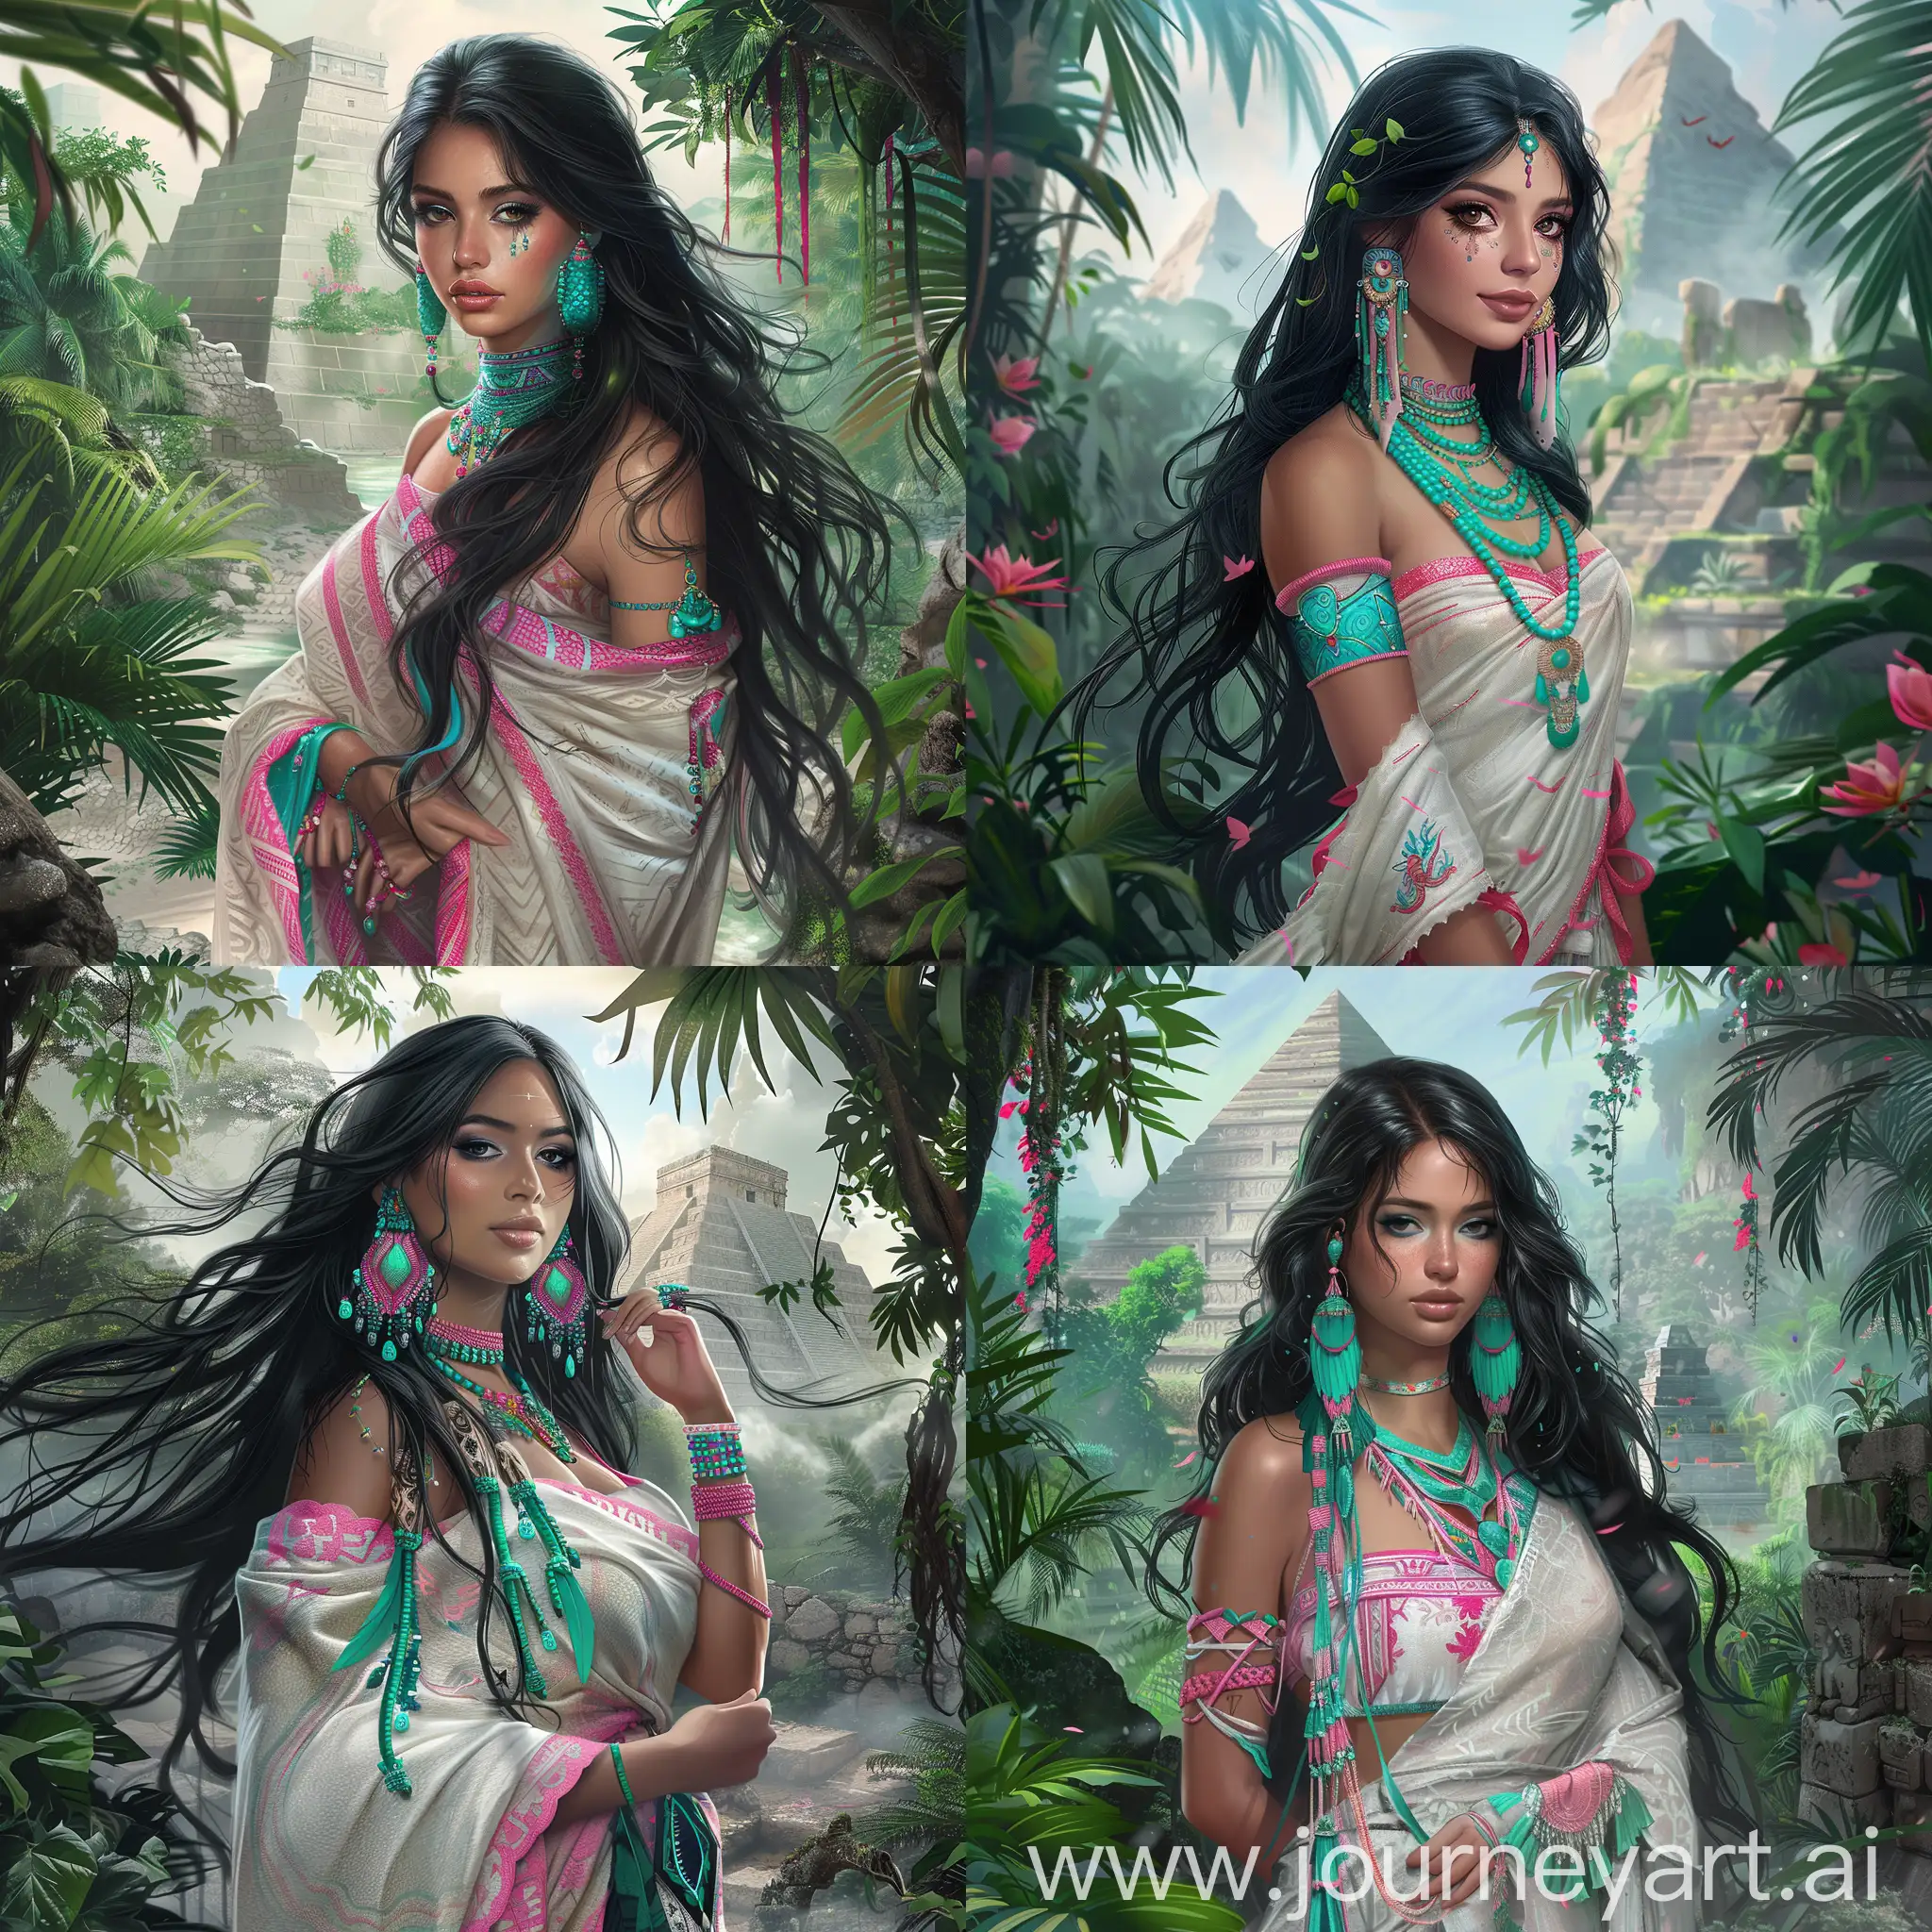 Create a highly detailed digital art scene of a beautiful woman inspired by tropical, ancient Mesoamerican aesthetics. She should have long, flowing black hair and be adorned with vibrant teal and pink jewelry, including earrings, necklaces, and armbands. Her attire should be a traditional, yet stylized wrap, primarily in white with pink accents, showcasing intricate patterns. 

The background should depict lush, tropical vegetation with a hint of mist, and prominently feature ancient stone pyramids partially overgrown with plants. The overall atmosphere should evoke a sense of mystery and adventure, with diffused sunlight filtering through the greenery, creating a soft, ethereal glow. Ensure the woman has a confident, serene expression, adding an element of regality to the scene